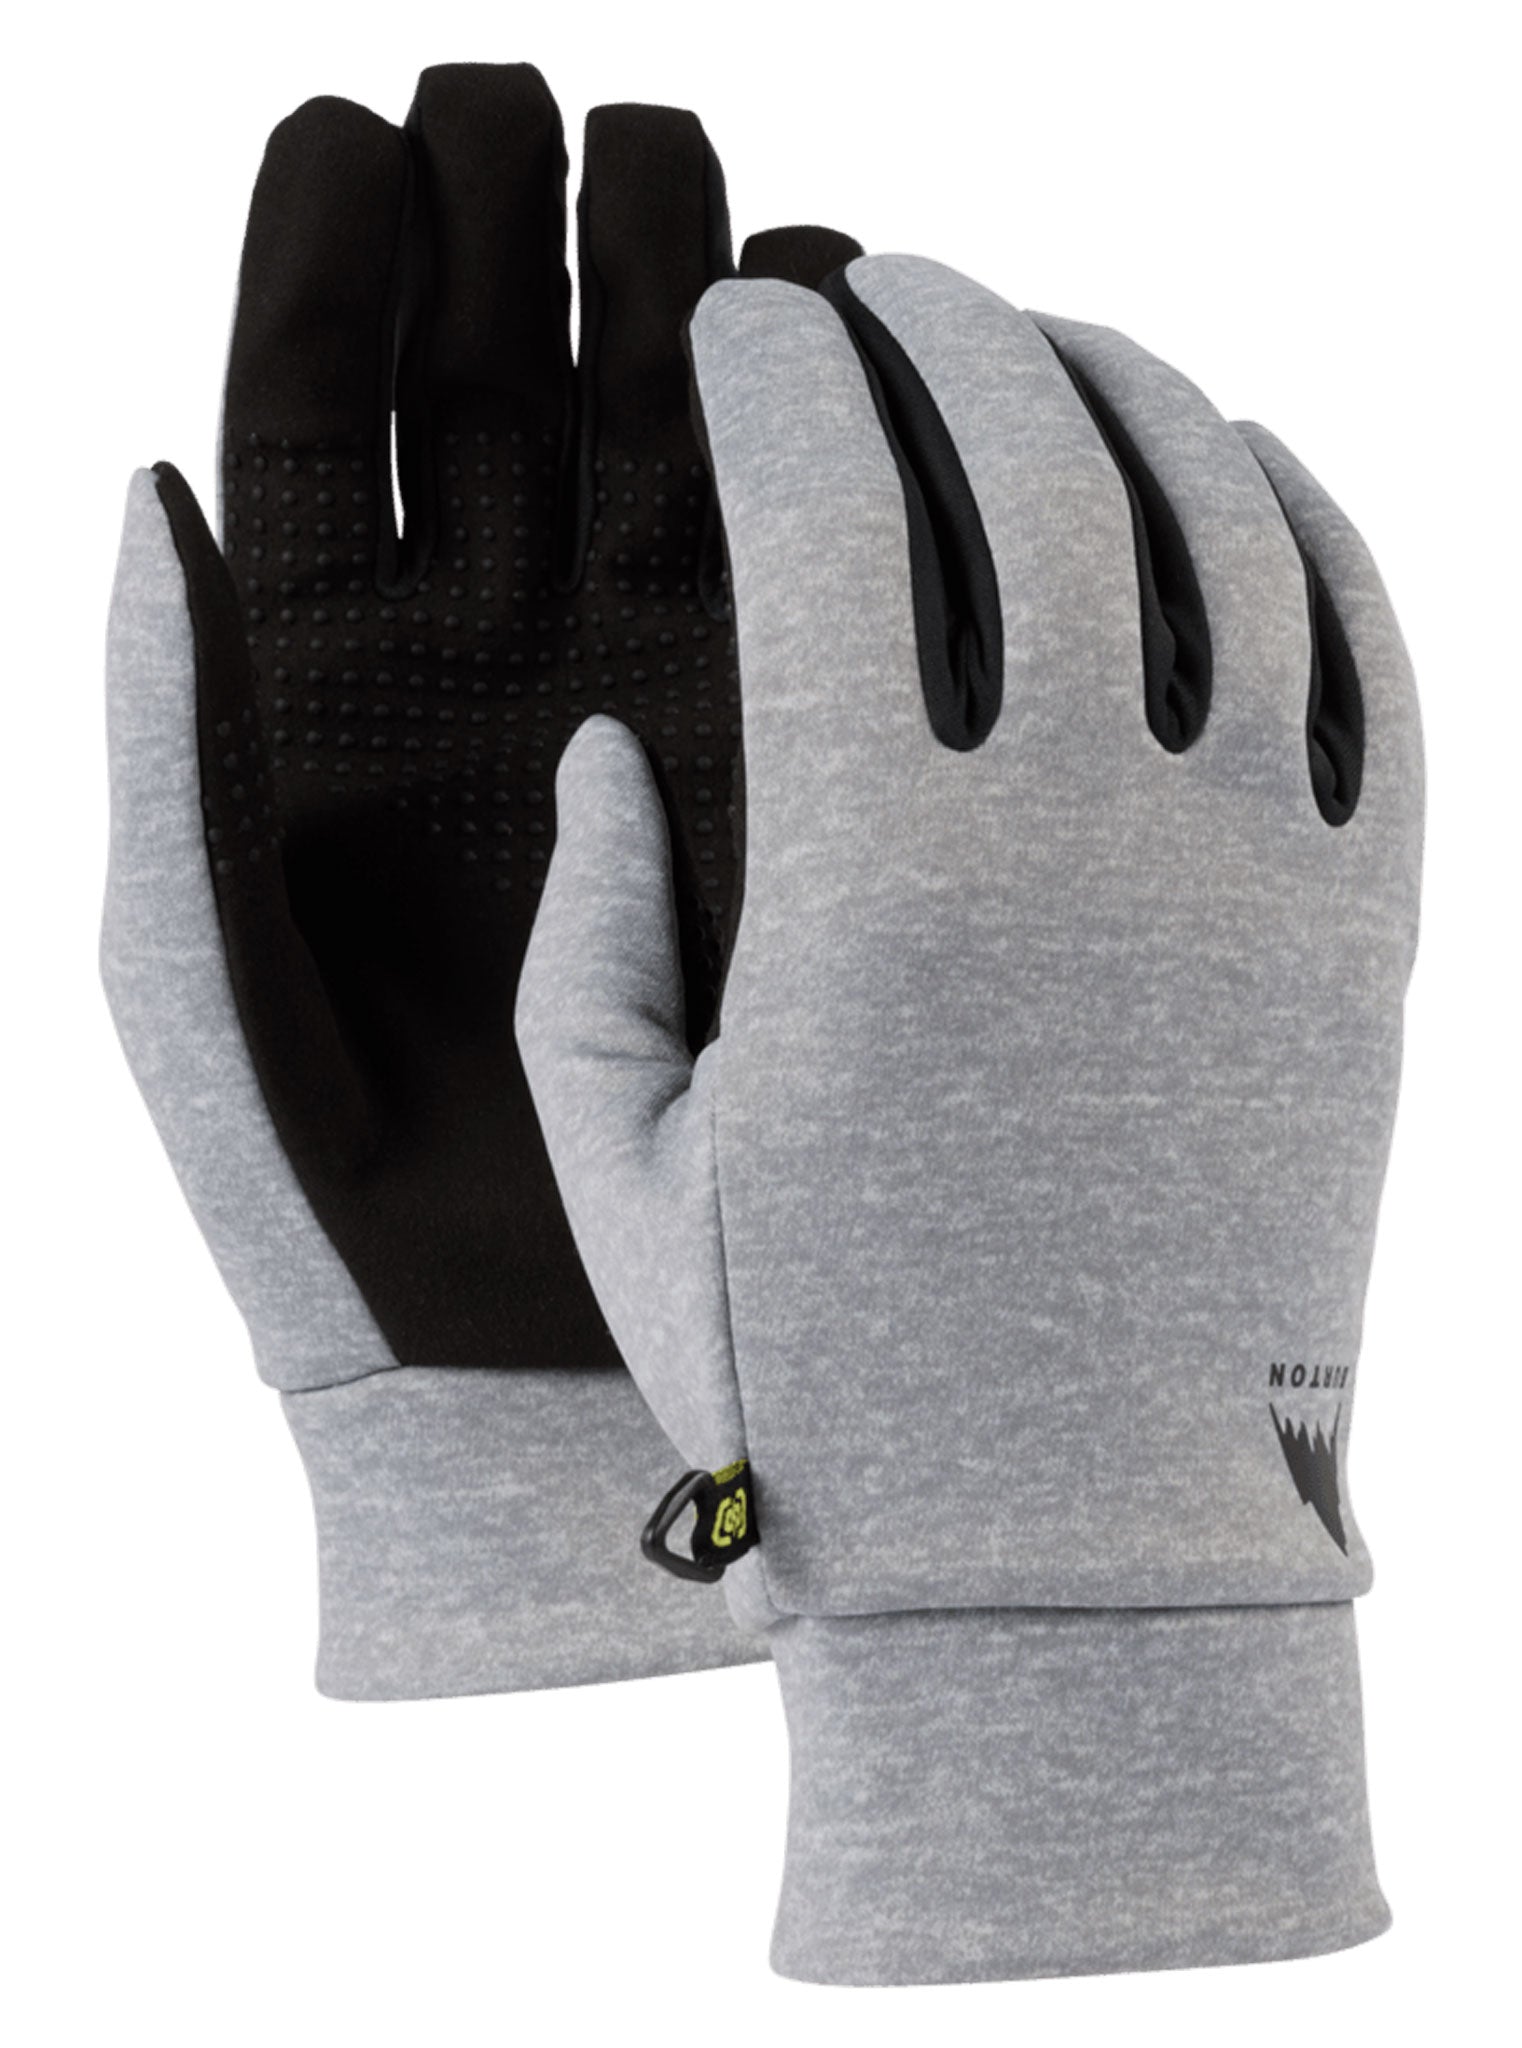 Men's Touch-N-Go Glove Liners